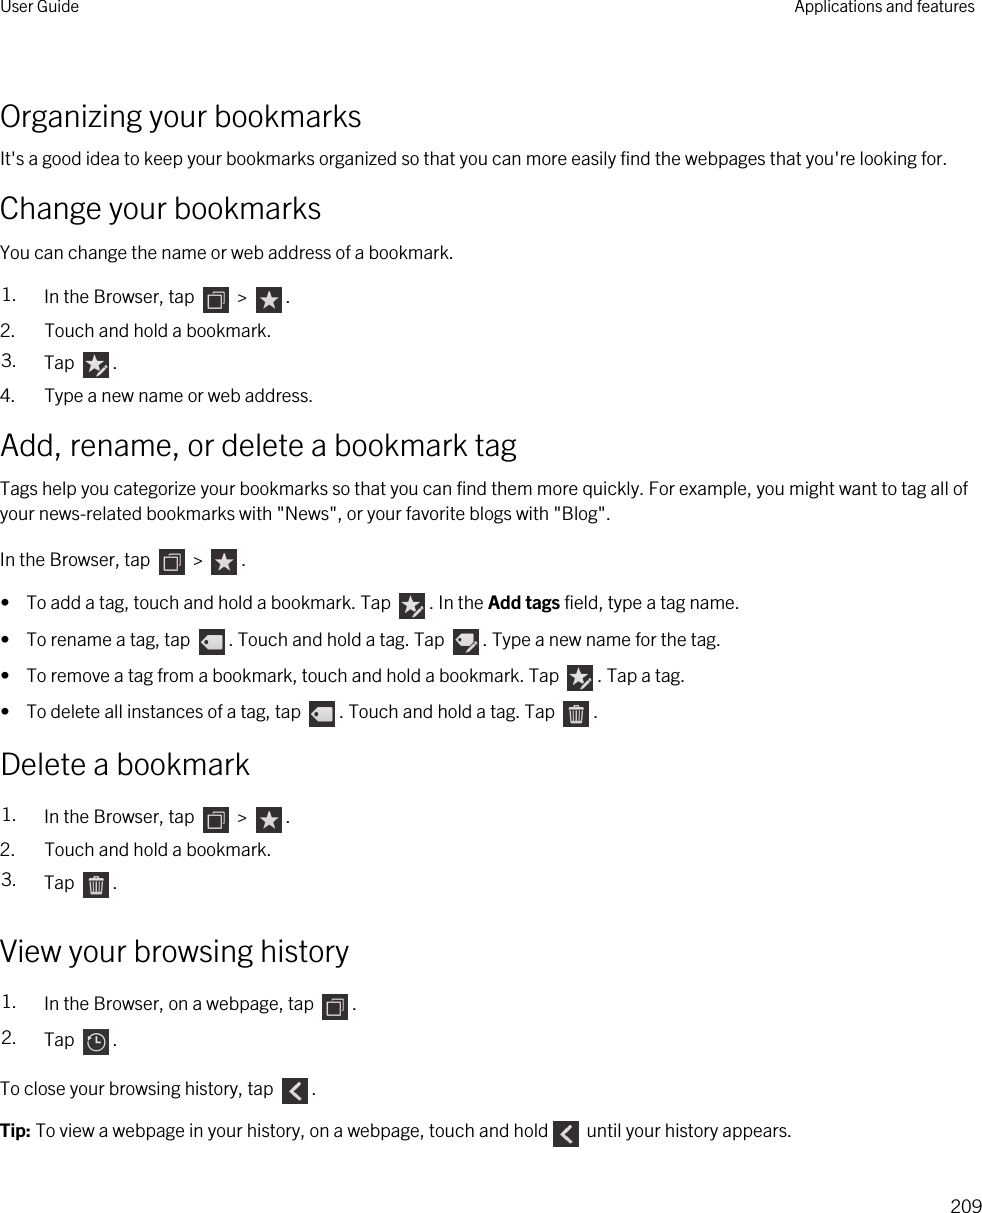 Organizing your bookmarksIt&apos;s a good idea to keep your bookmarks organized so that you can more easily find the webpages that you&apos;re looking for.Change your bookmarksYou can change the name or web address of a bookmark.1. In the Browser, tap   &gt;  .2. Touch and hold a bookmark.3. Tap  .4. Type a new name or web address.Add, rename, or delete a bookmark tagTags help you categorize your bookmarks so that you can find them more quickly. For example, you might want to tag all of your news-related bookmarks with &quot;News&quot;, or your favorite blogs with &quot;Blog&quot;.In the Browser, tap   &gt;  .•  To add a tag, touch and hold a bookmark. Tap  . In the Add tags field, type a tag name.•  To rename a tag, tap  . Touch and hold a tag. Tap  . Type a new name for the tag.•  To remove a tag from a bookmark, touch and hold a bookmark. Tap  . Tap a tag.•  To delete all instances of a tag, tap  . Touch and hold a tag. Tap  .Delete a bookmark1. In the Browser, tap   &gt;  .2. Touch and hold a bookmark.3. Tap  .View your browsing history1. In the Browser, on a webpage, tap  .2. Tap  .To close your browsing history, tap  .Tip: To view a webpage in your history, on a webpage, touch and hold  until your history appears.User Guide Applications and features209